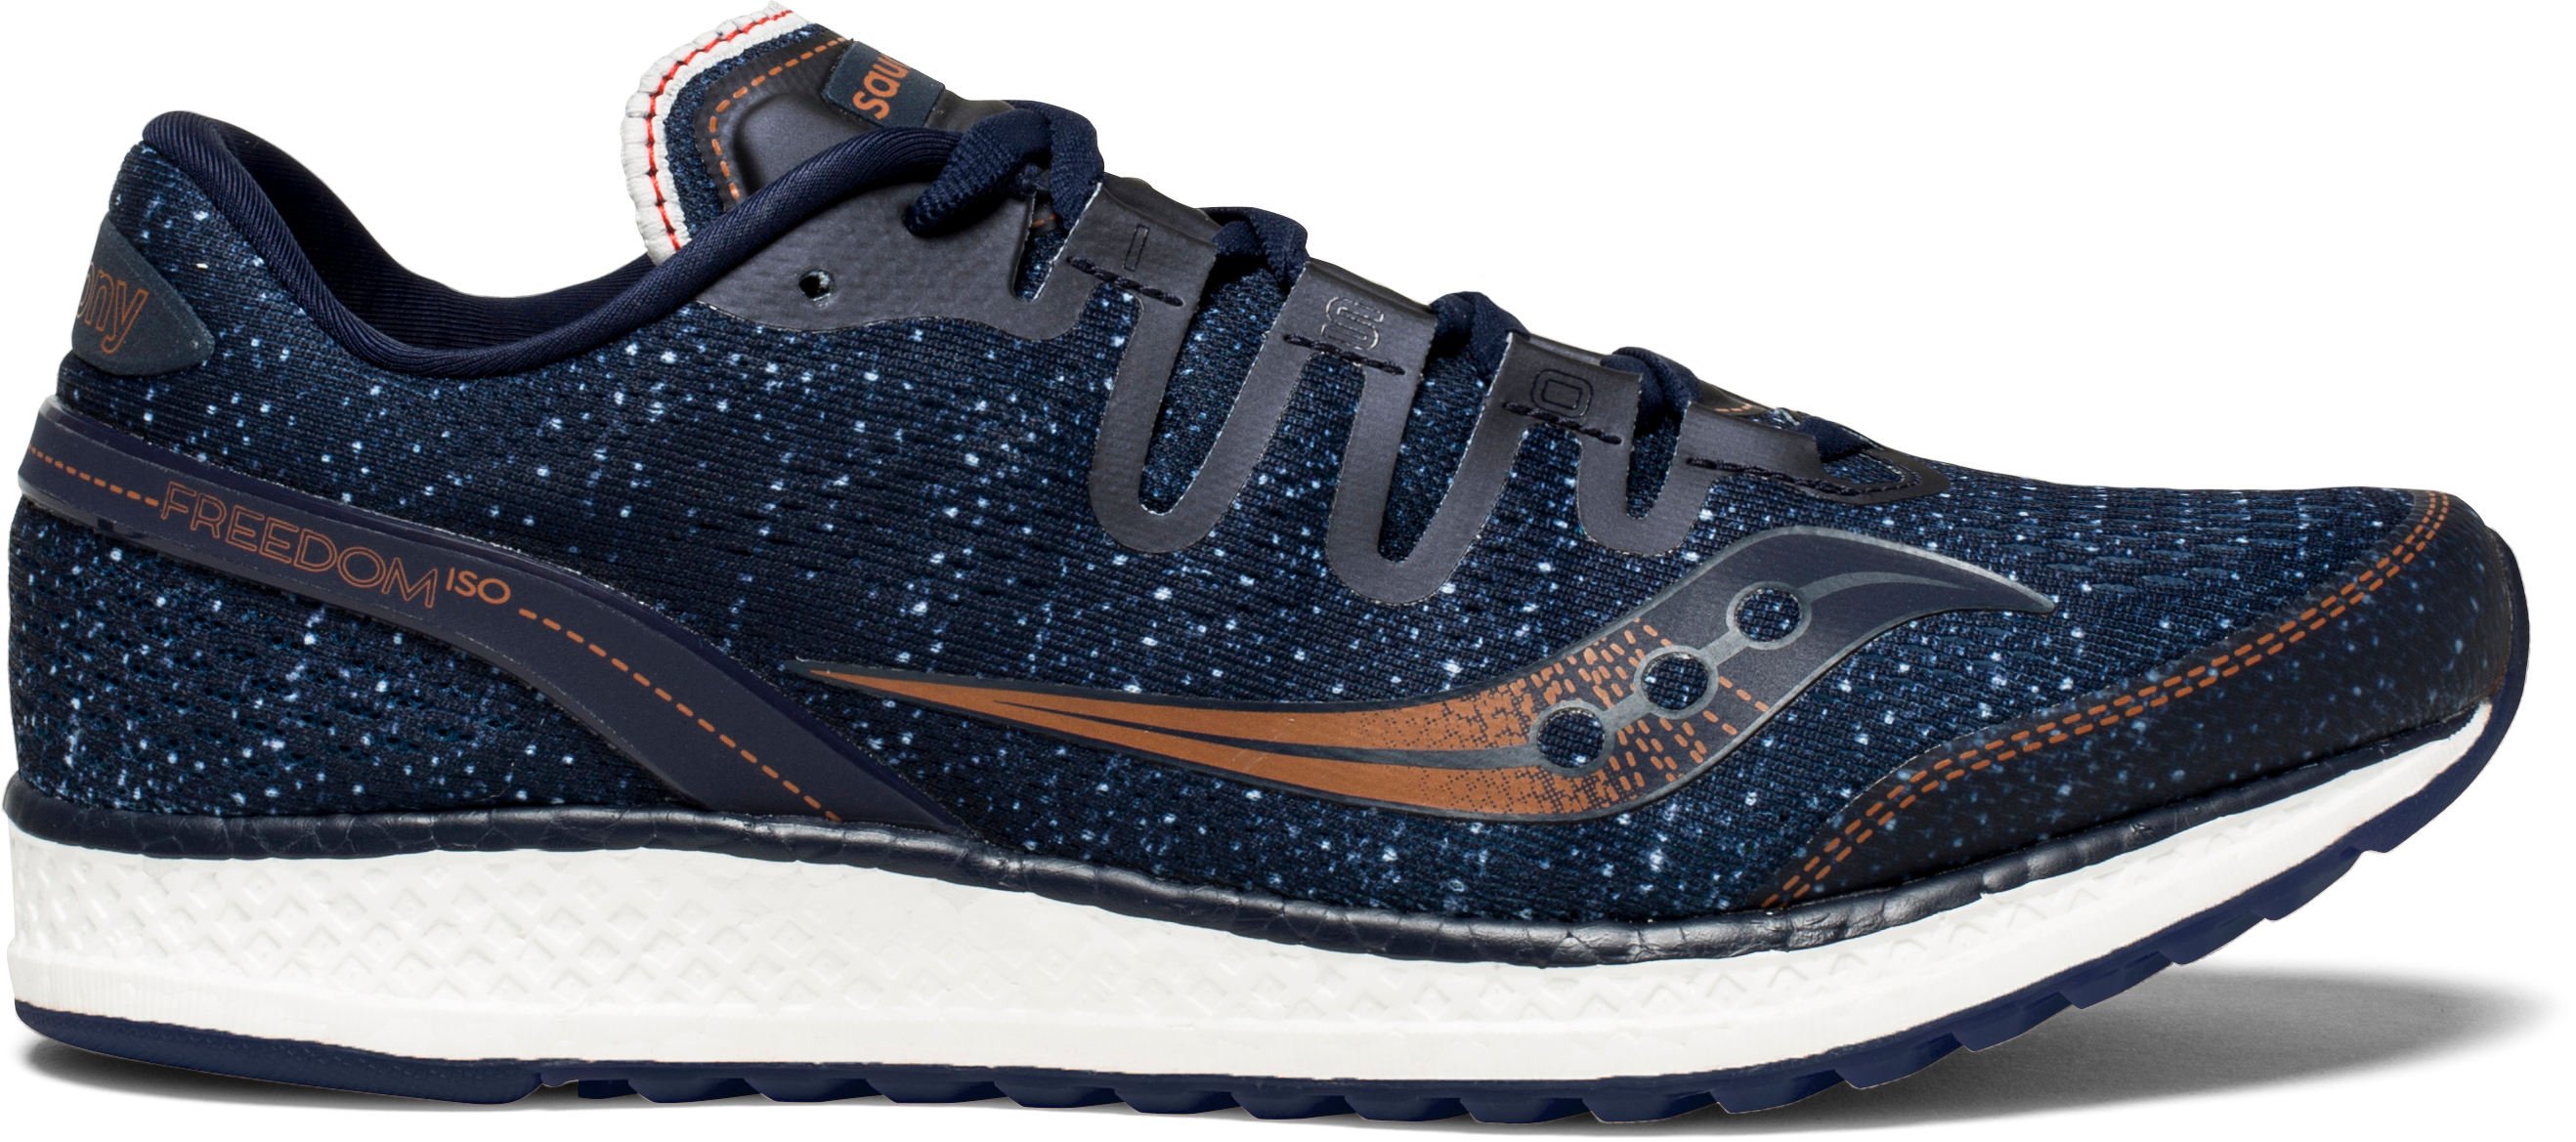 Running shoes SAUCONY FREEDOM ISO